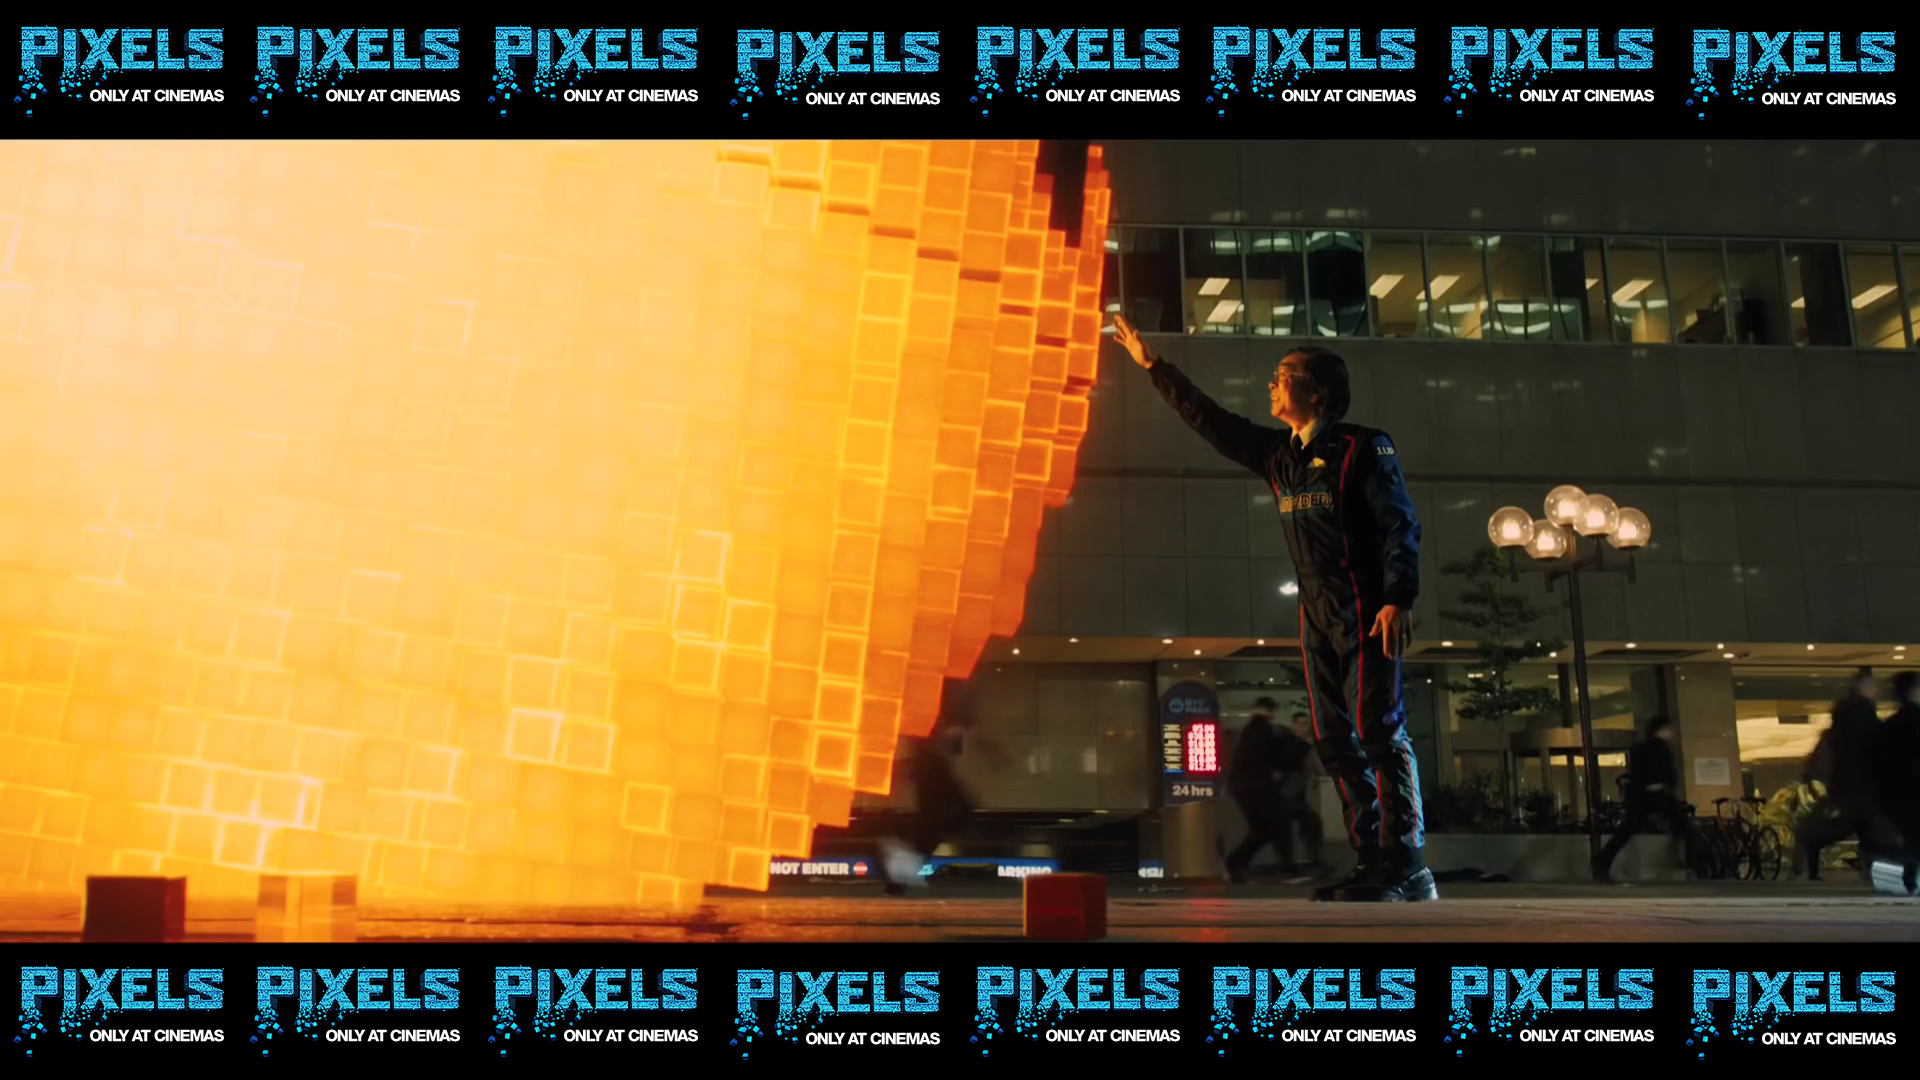 Pixels (2015): Movie HD Wallpapers & HD Still Shots | Page 4 of 4